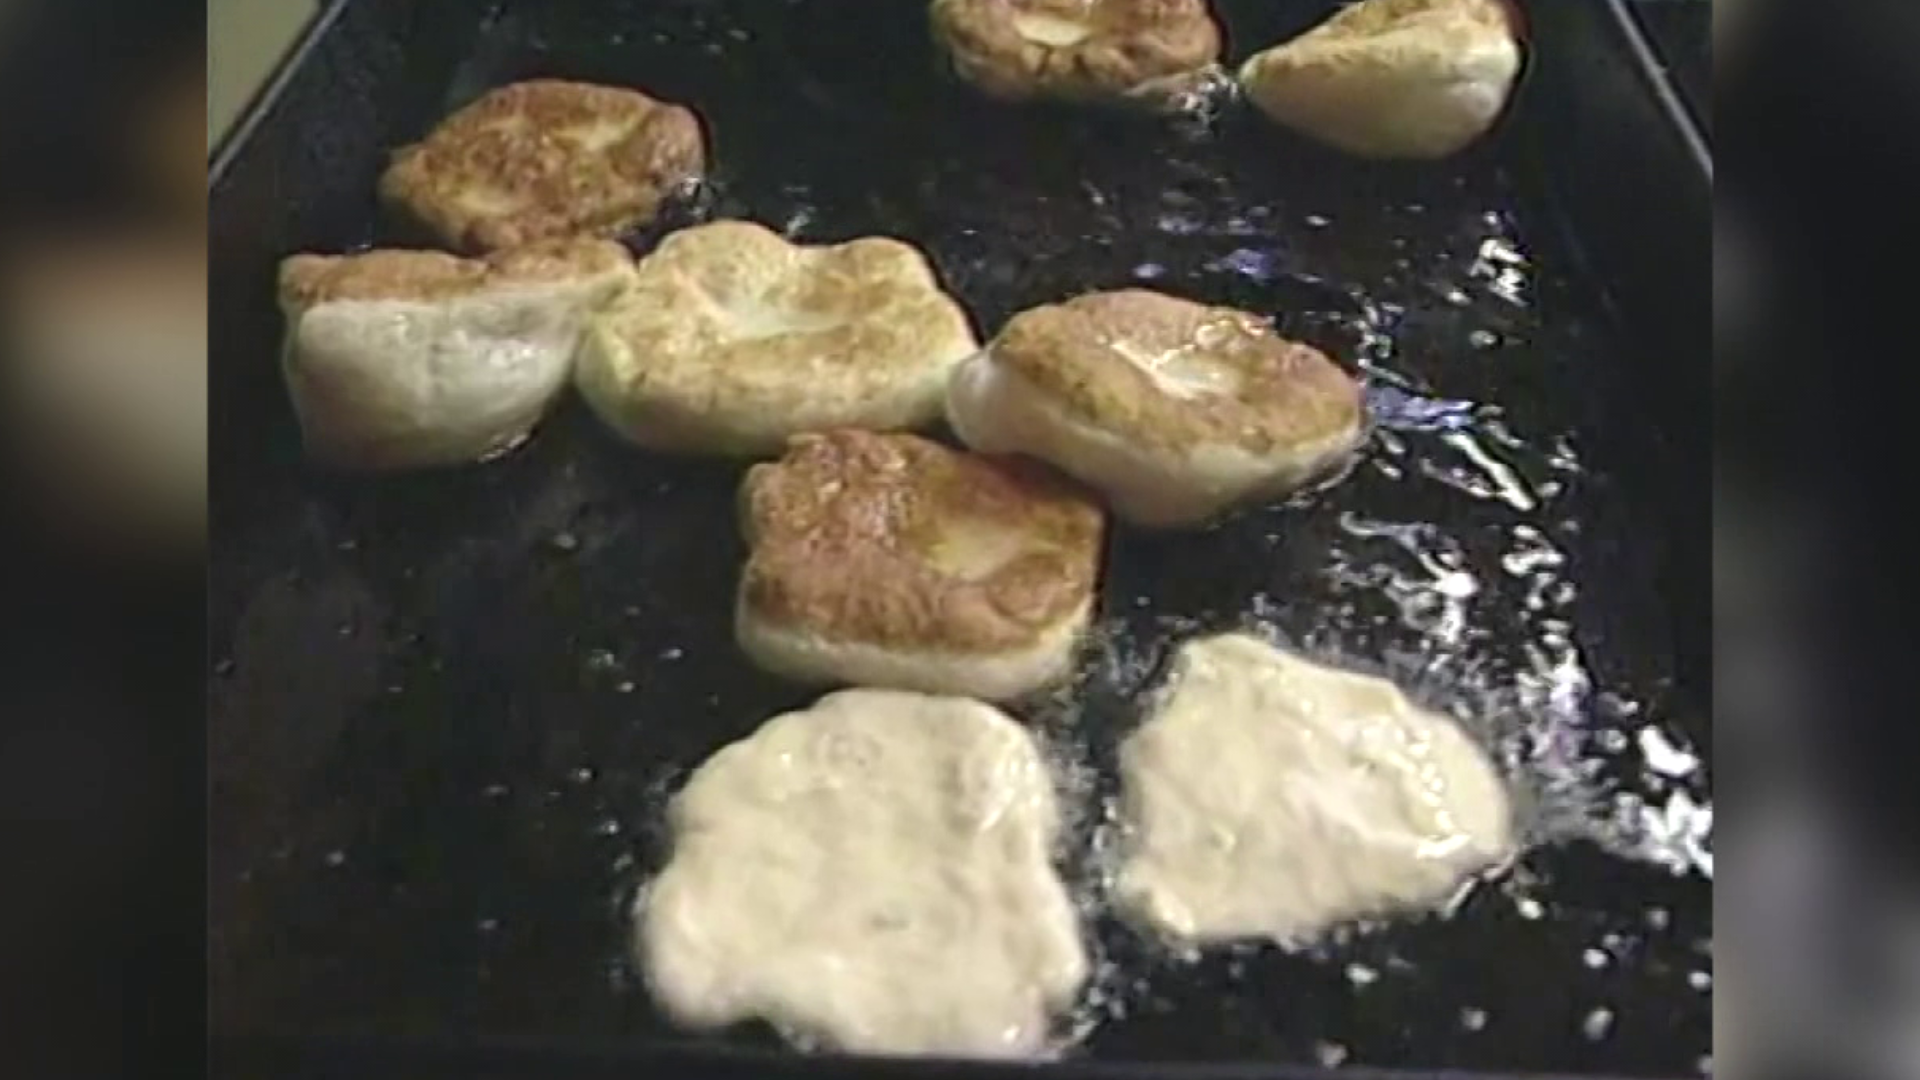 Join Mike Stevens on a trip to 1990 and how to make a fried, sweet Lenten treat.